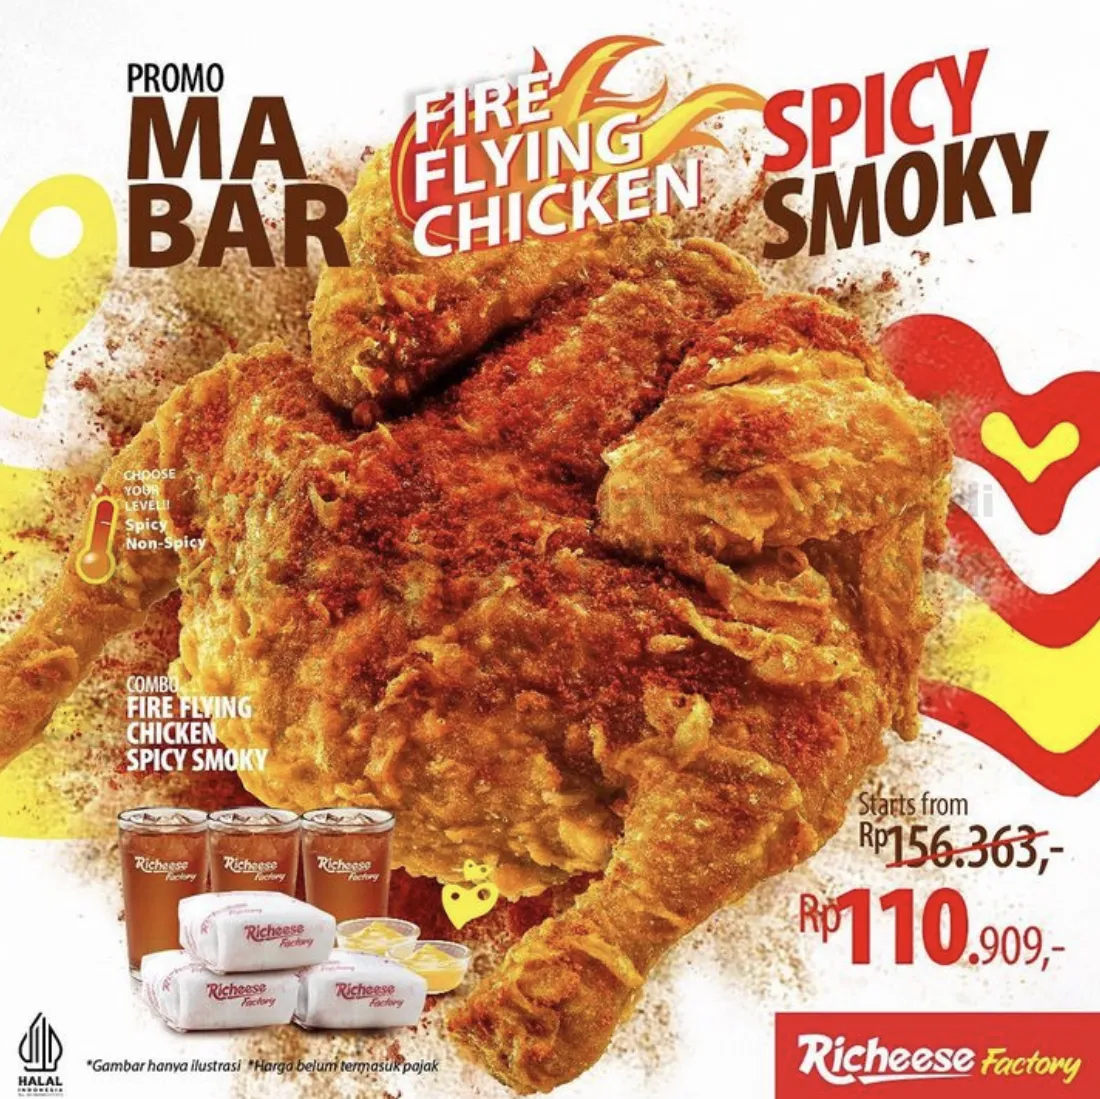 Promo RICHEESE FACTORY Combo MABAR Fire Flying Chicken SPICY SMOKY mulai Rp. 110.909